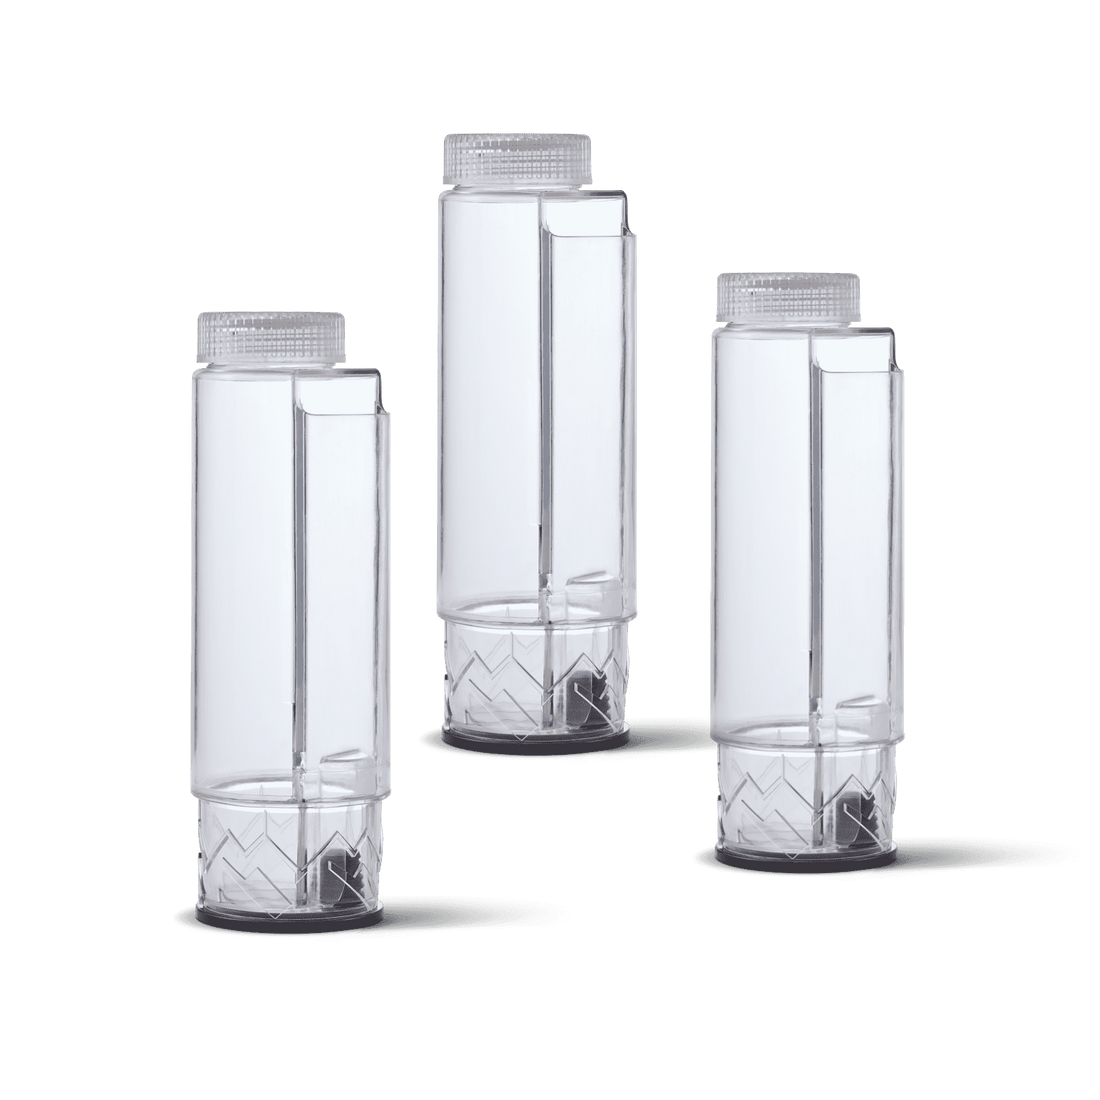 2.0 Canisters